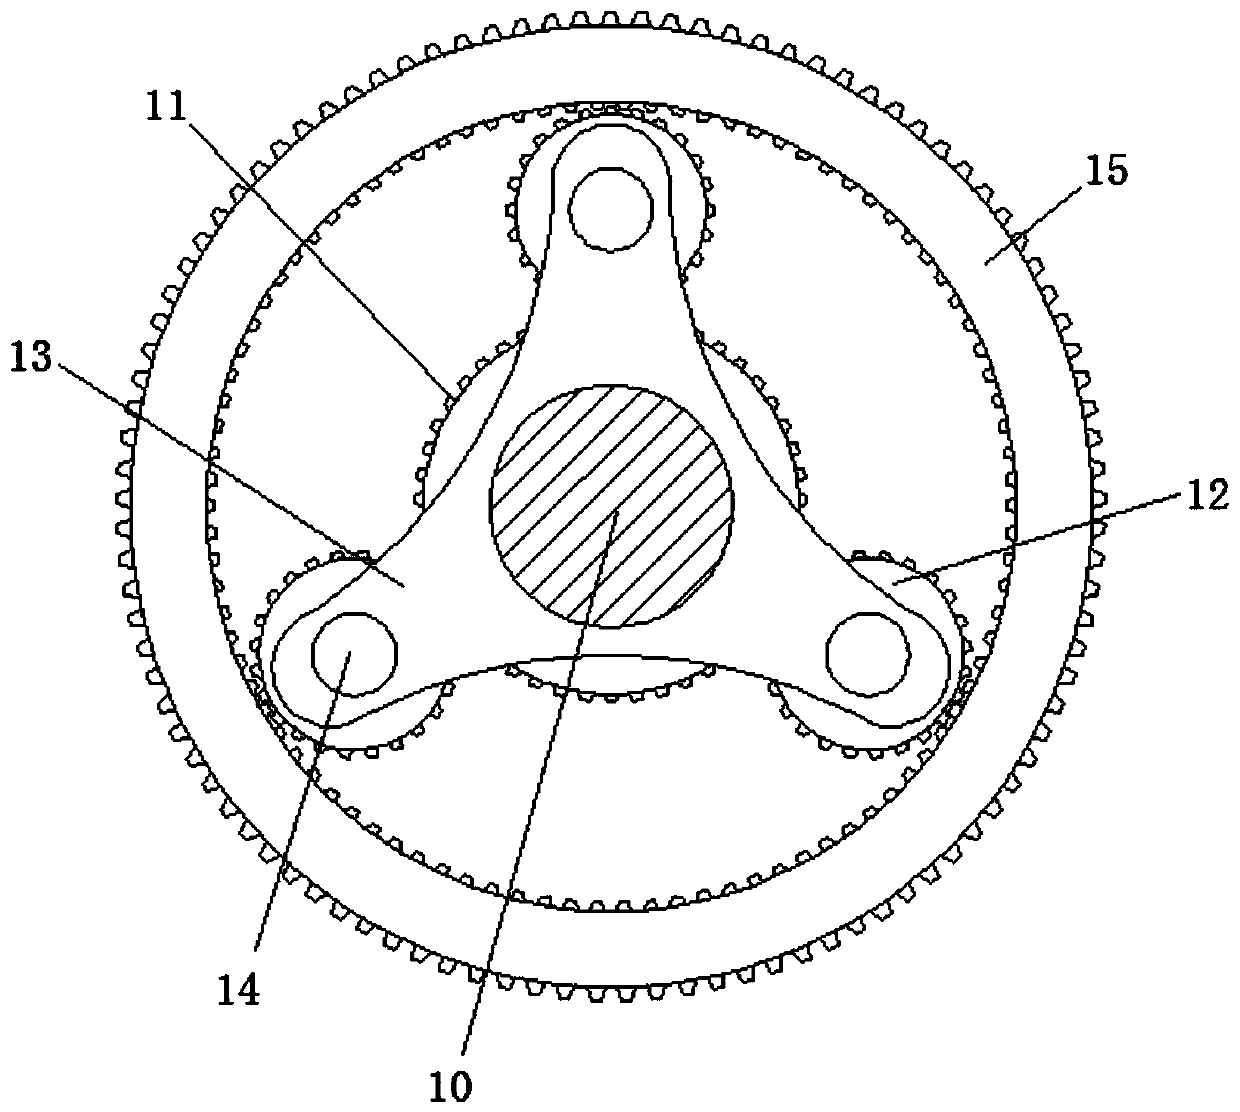 Leather shoe leather dyeing device based on planetary gear transmission principle